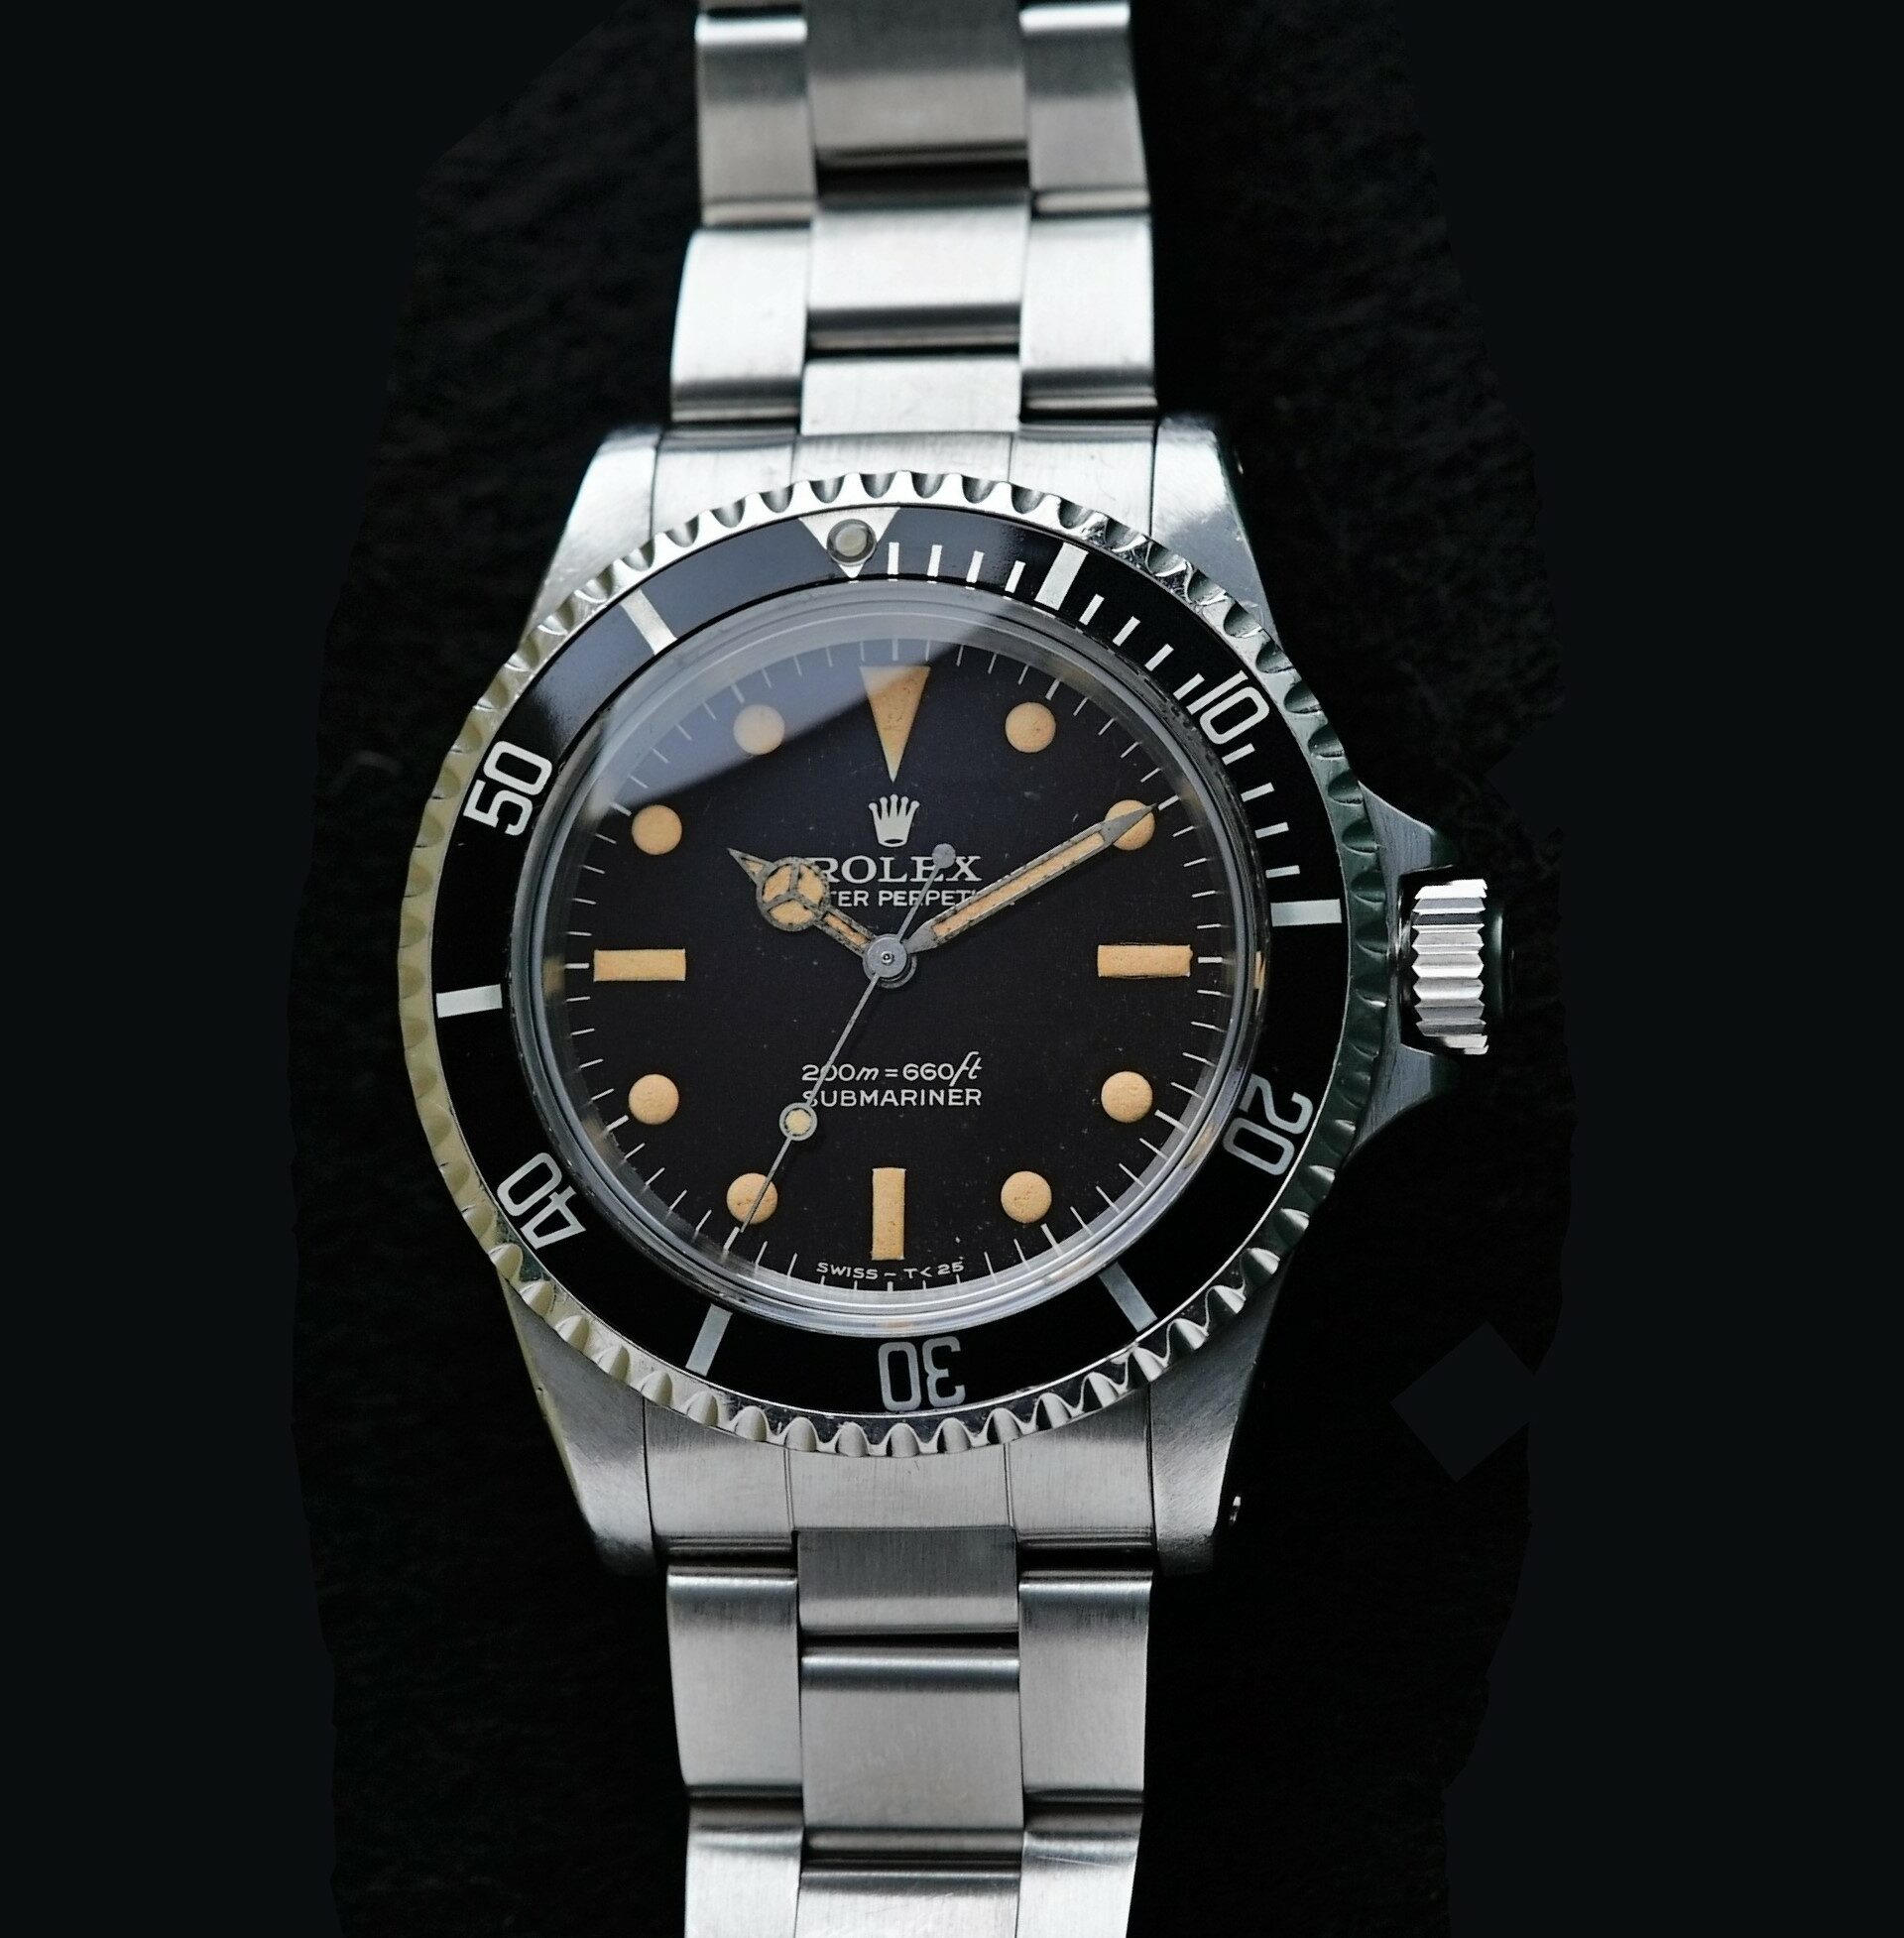 Rolex Submariner 5513 Bart Simpson Tropical Dial Original Patina Unpolished watch featured under white light.